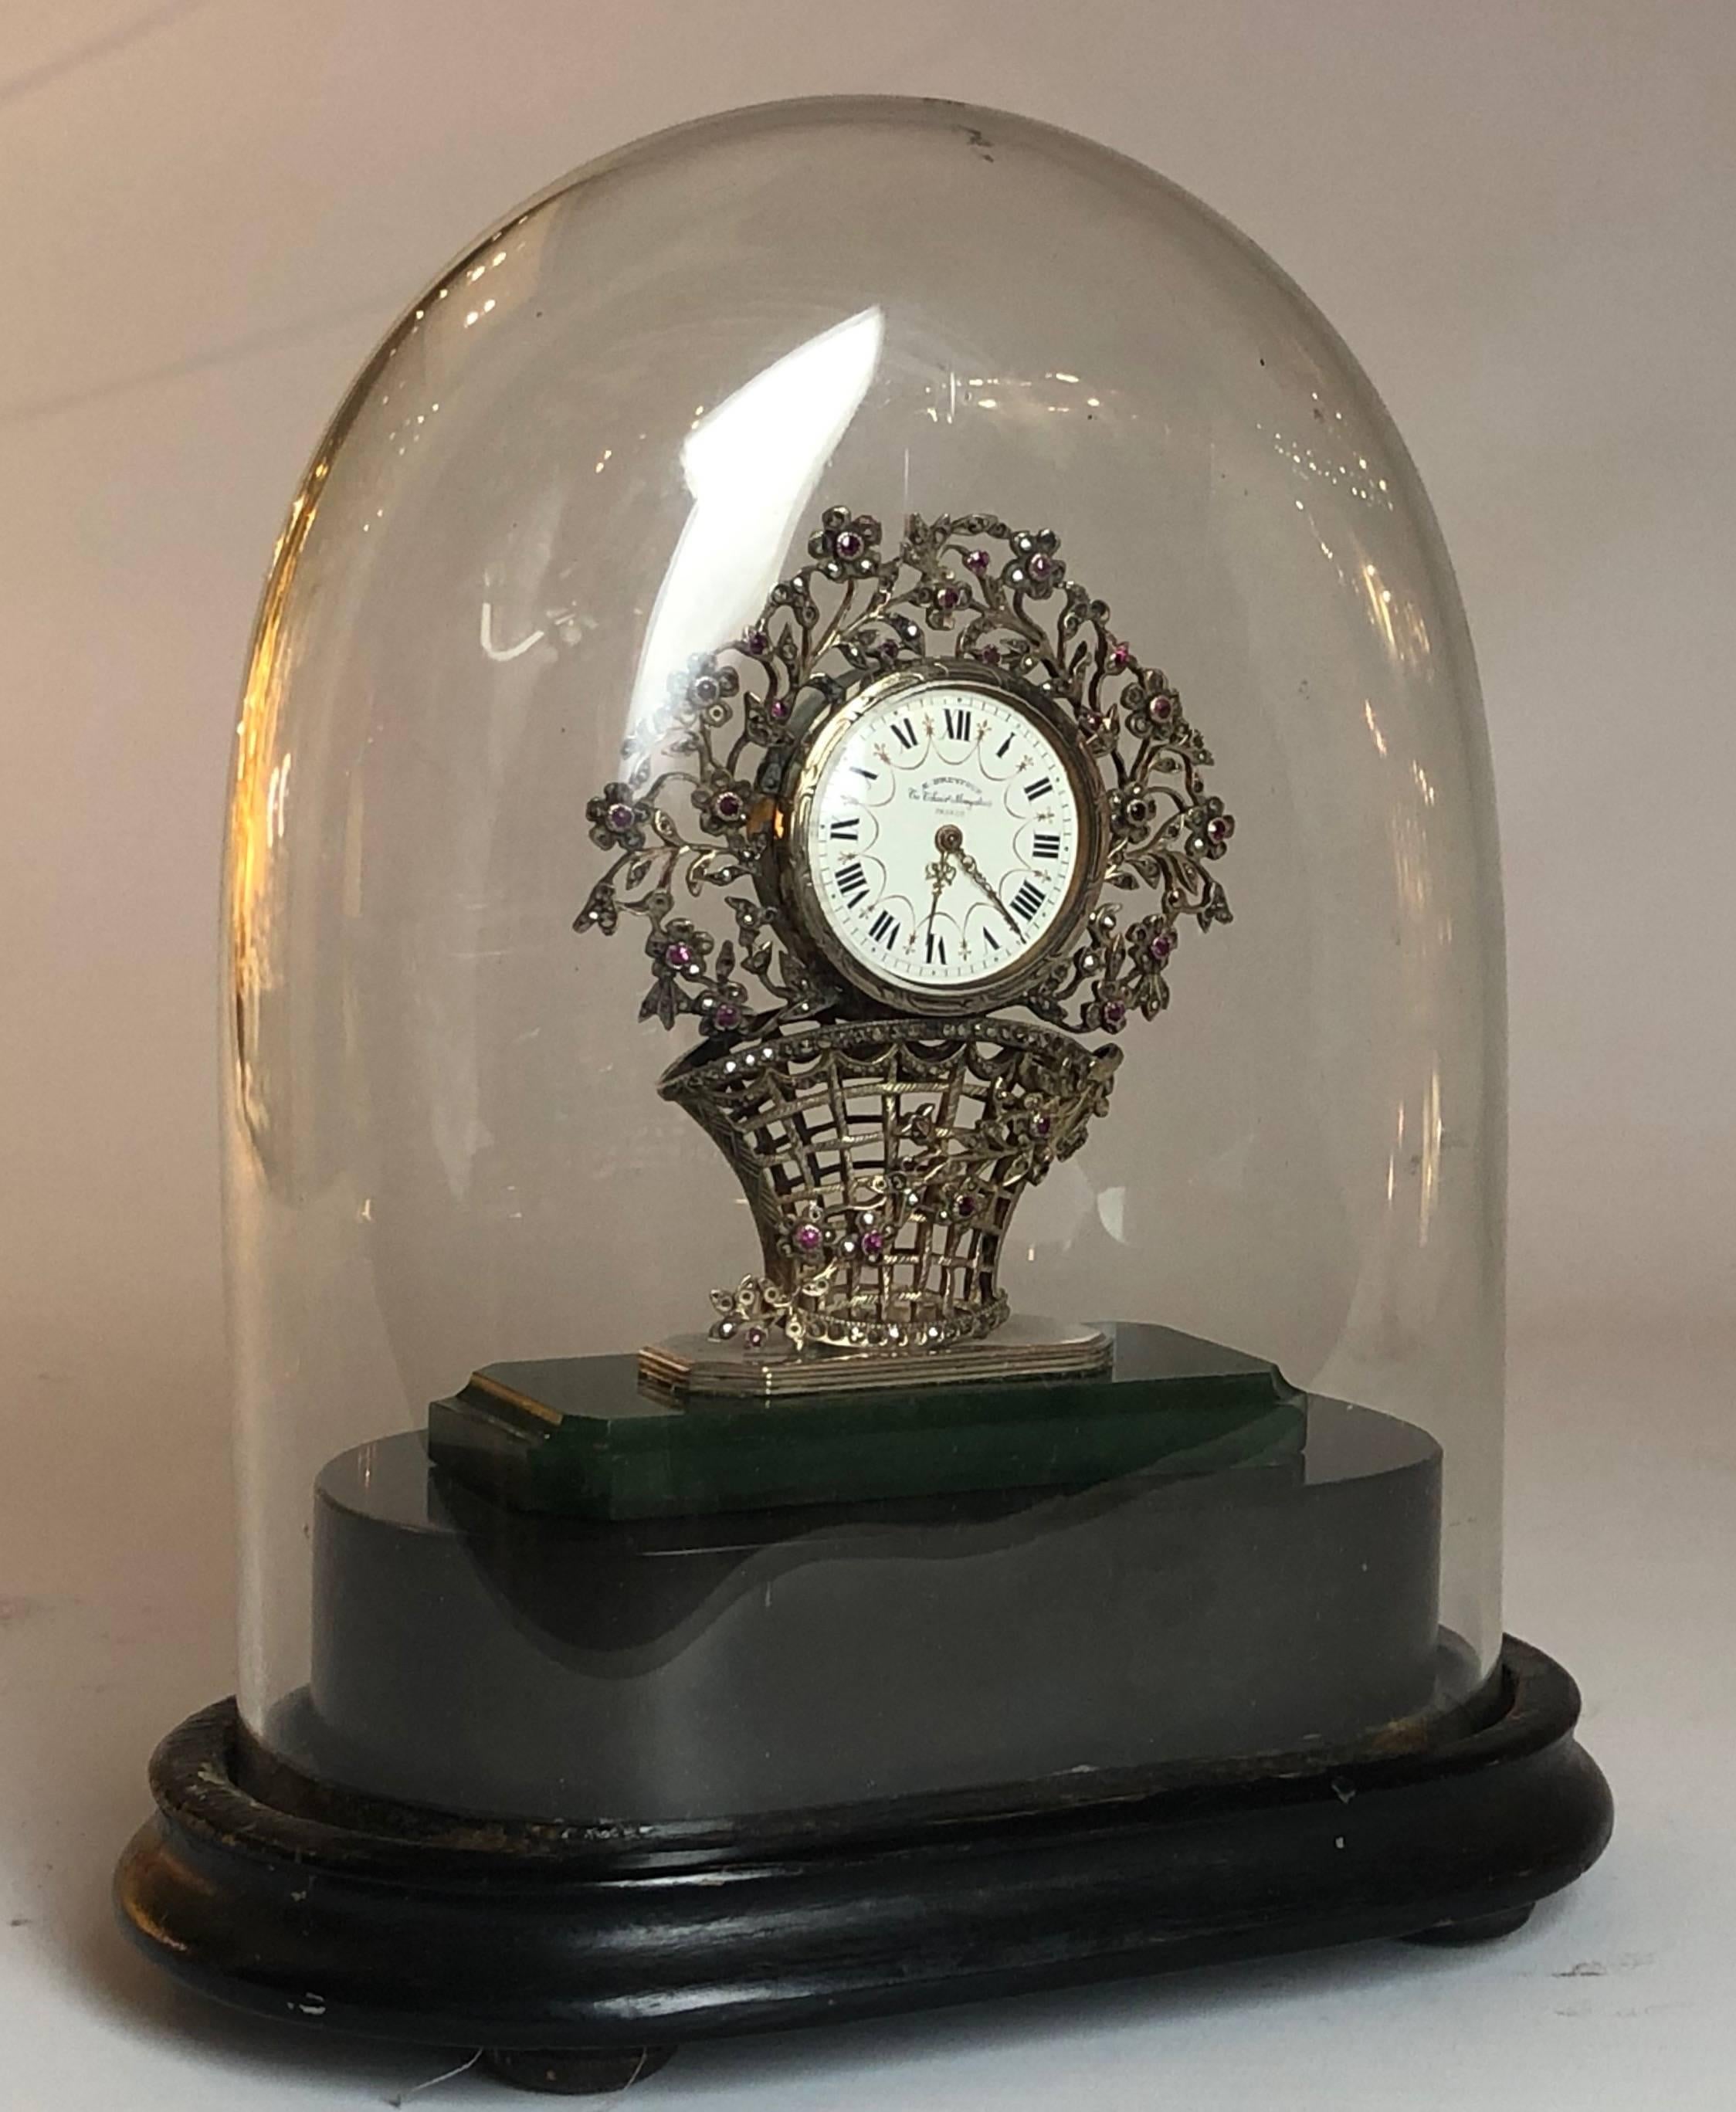 This beautiful antique miniature table clock is small but perfectly formed, featuring a delicate inlay of precious stones.

From the highly respected clockmaker Edouard Henry Dreyfous

Paris, circa 1880.

Measures: The clock out of the dome